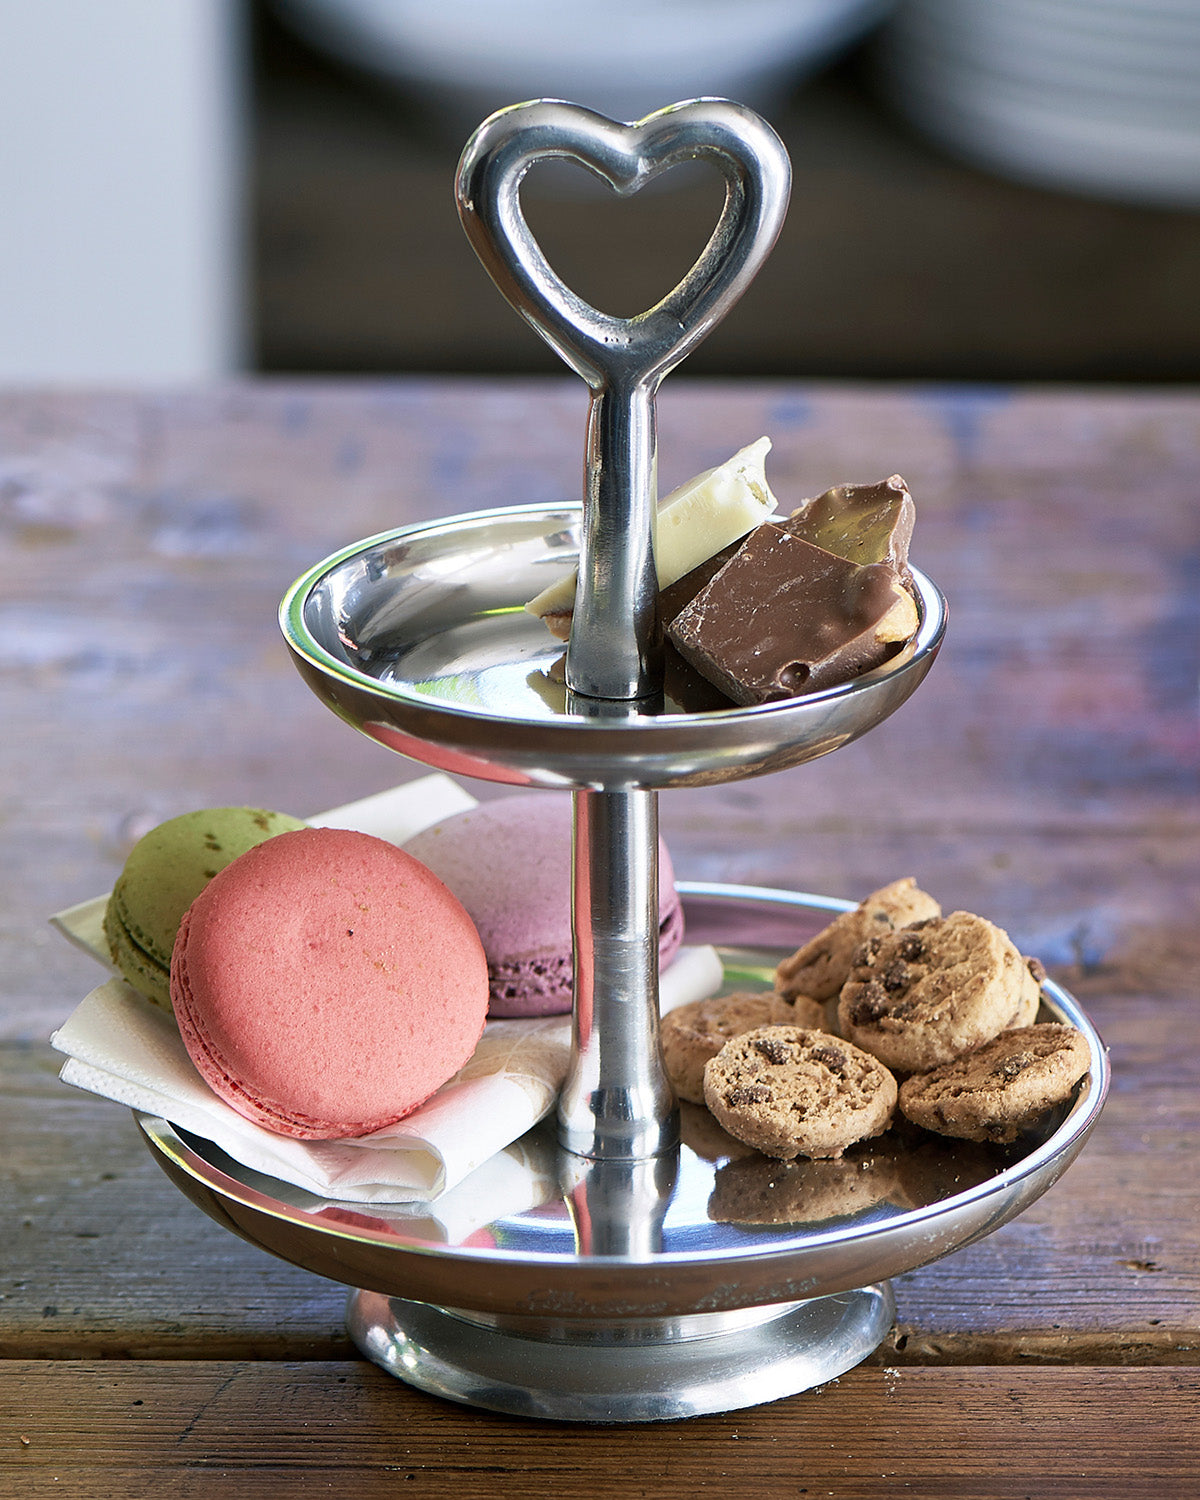 ETAGÈRE glossy aluminum heart-shaped carrier ring by Riviera Maison, decorated with sweets